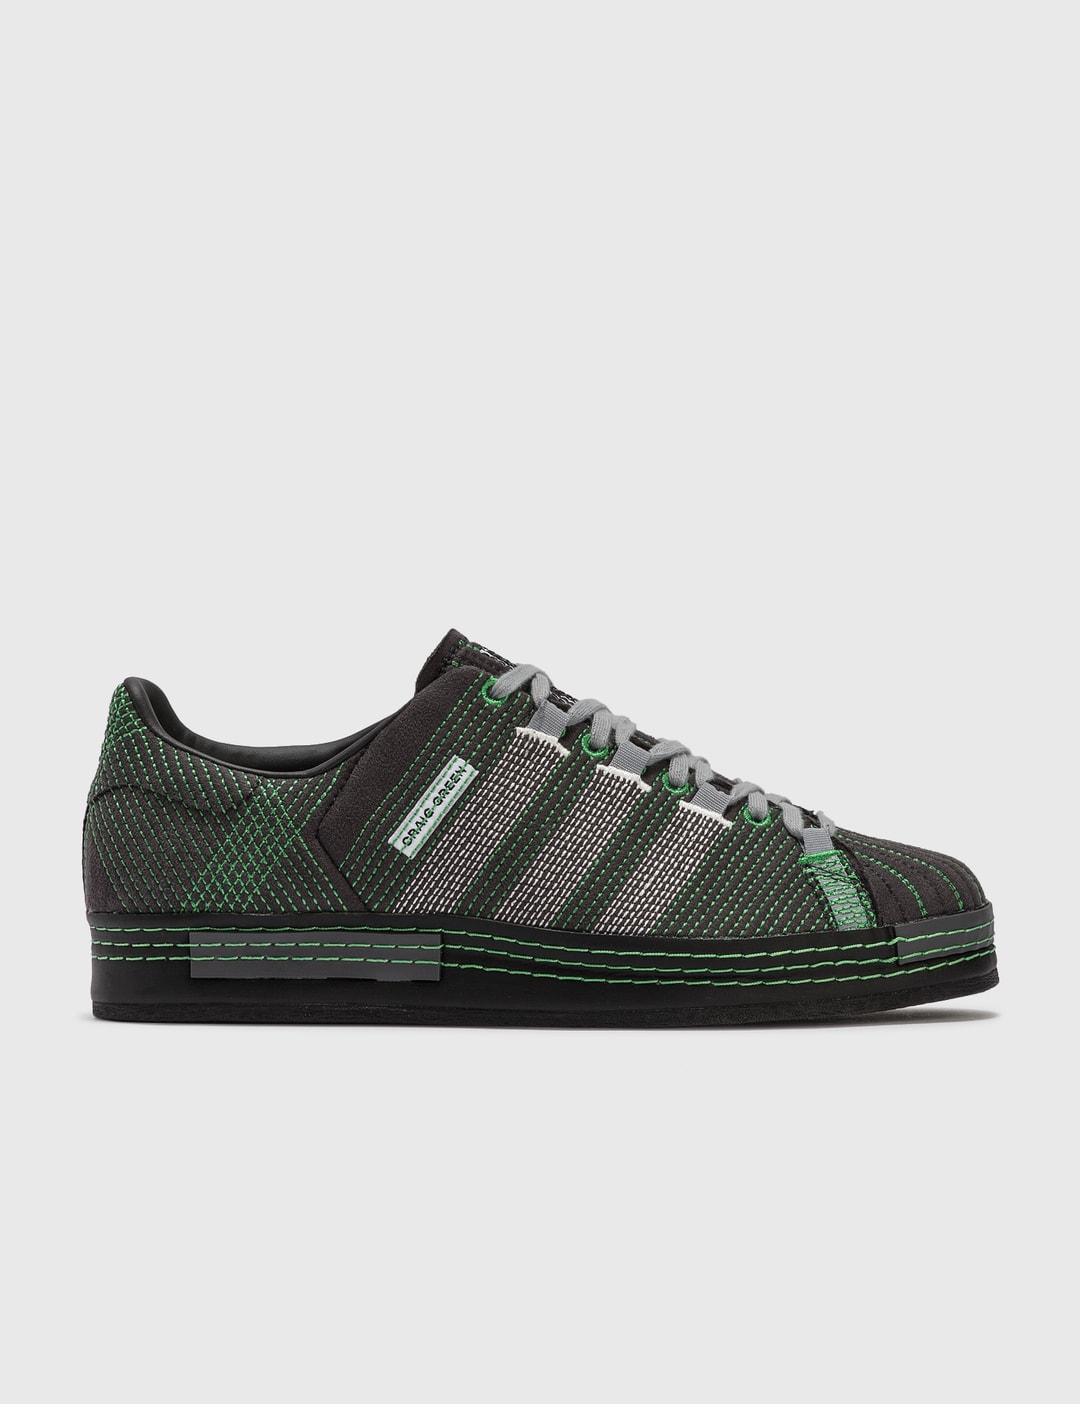 Adidas Originals - Craig Green Adidas Consortium Superstar | HBX - Globally Curated Fashion and Lifestyle by Hypebeast